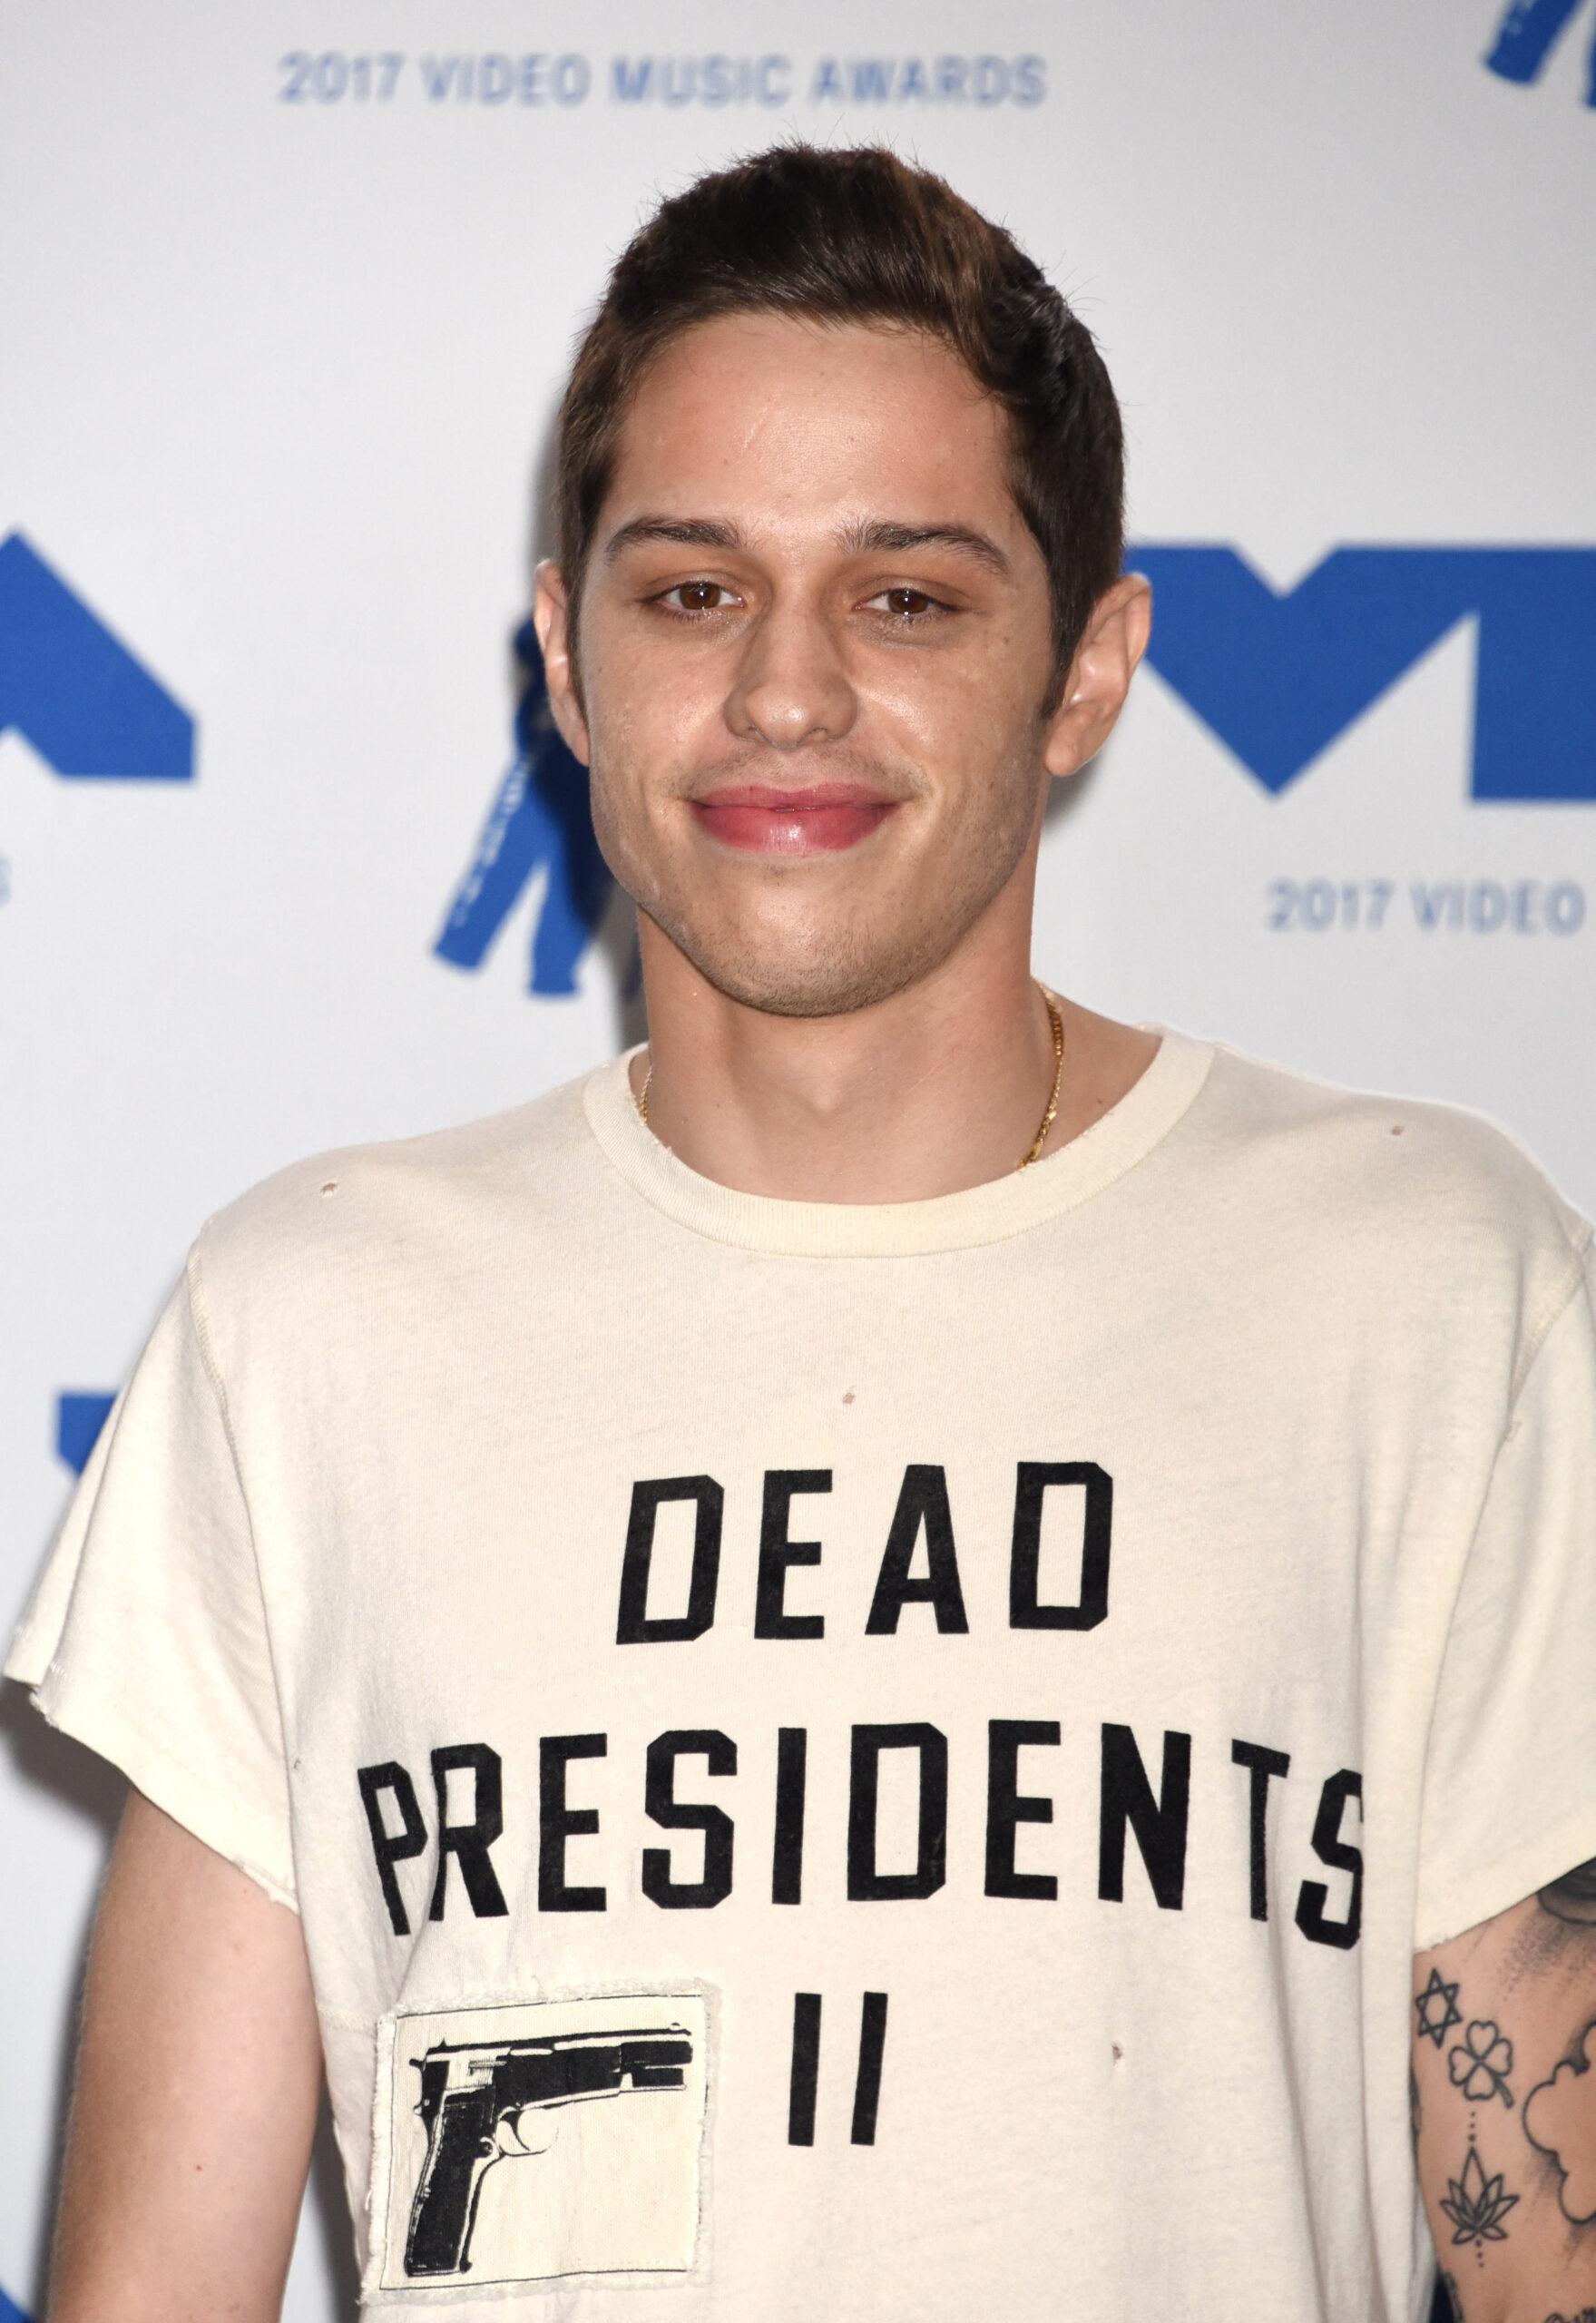 Pete Davidson's Go-To Meals As He Improves His Cooking Skills